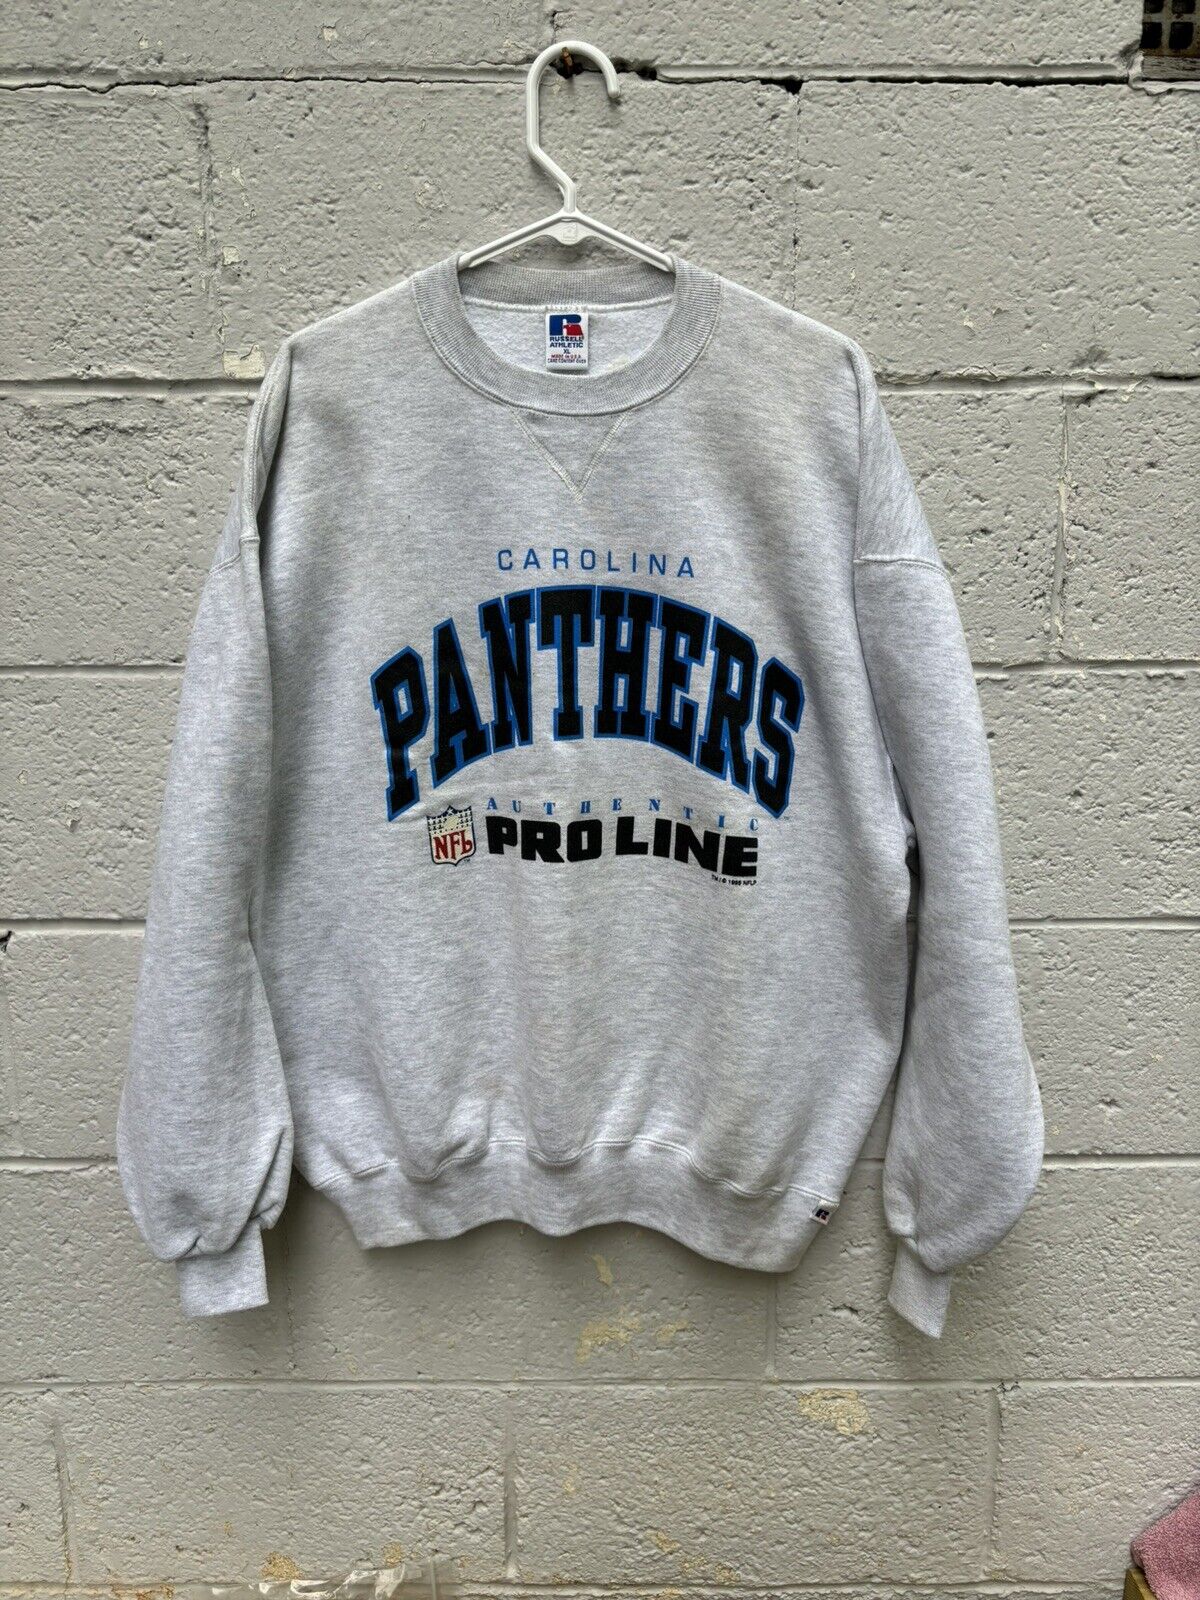 Vtg 1995 NFL Russell athletic Carolina Panthers Sweatshirt XL Made In USA